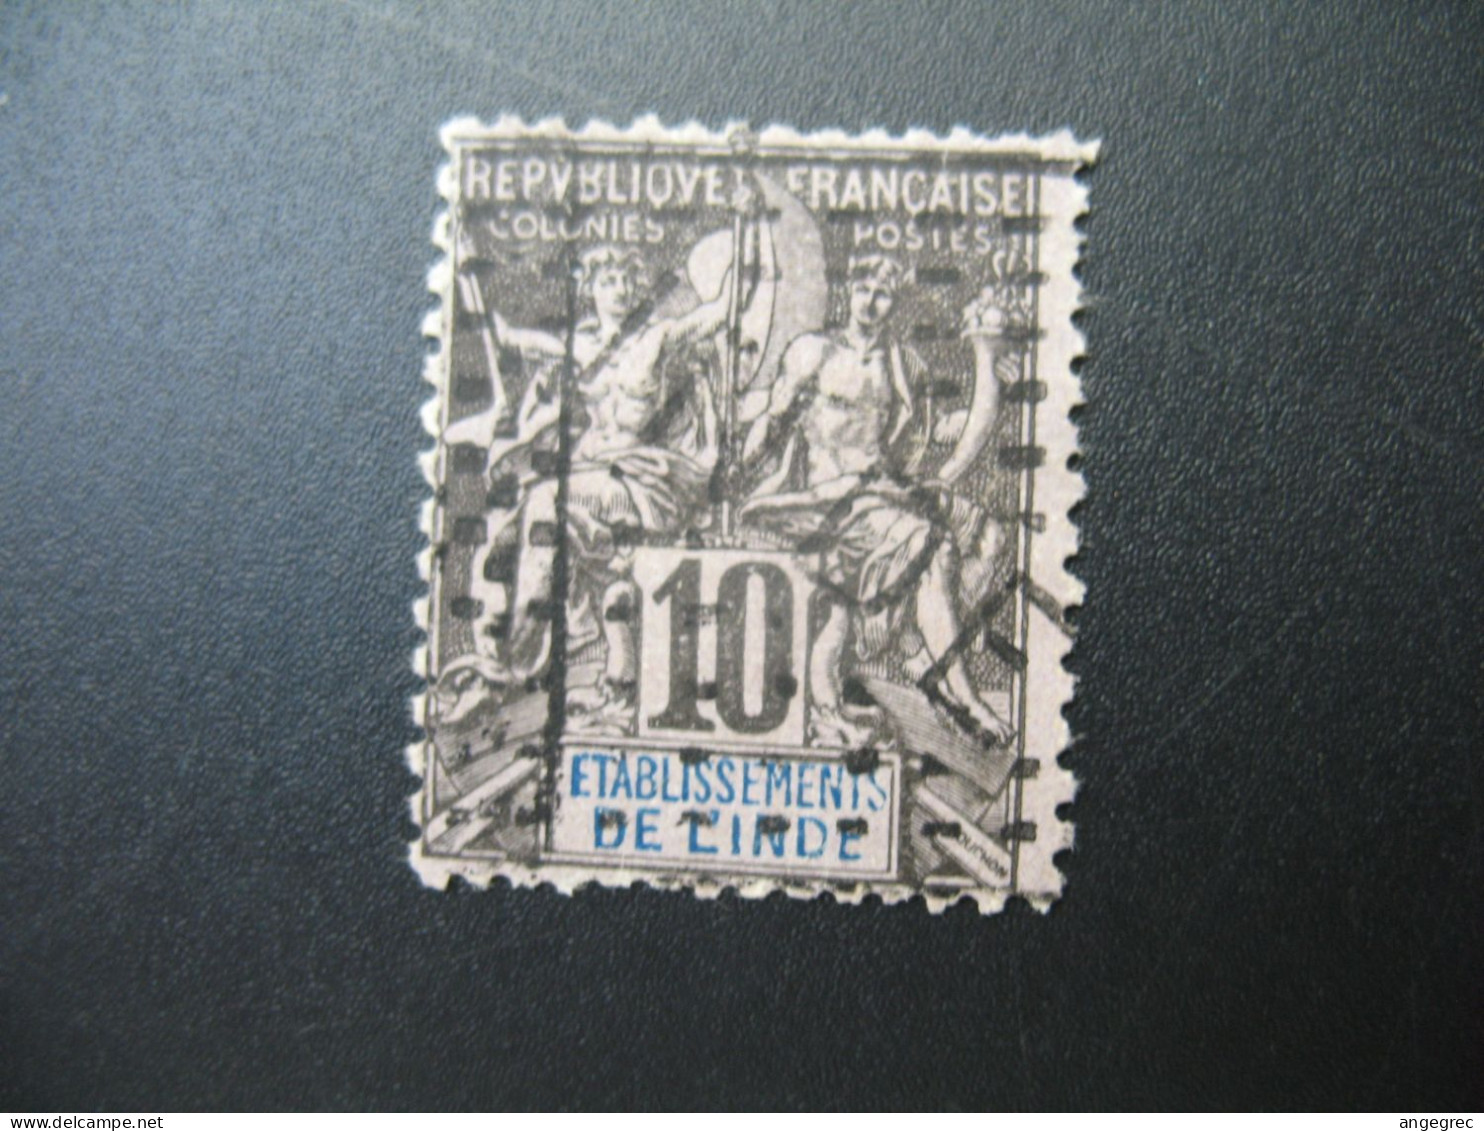 Inde Française Karikal Stamps French Colonies N° 5 Neuf * NSG Maury à Voir - Used Stamps